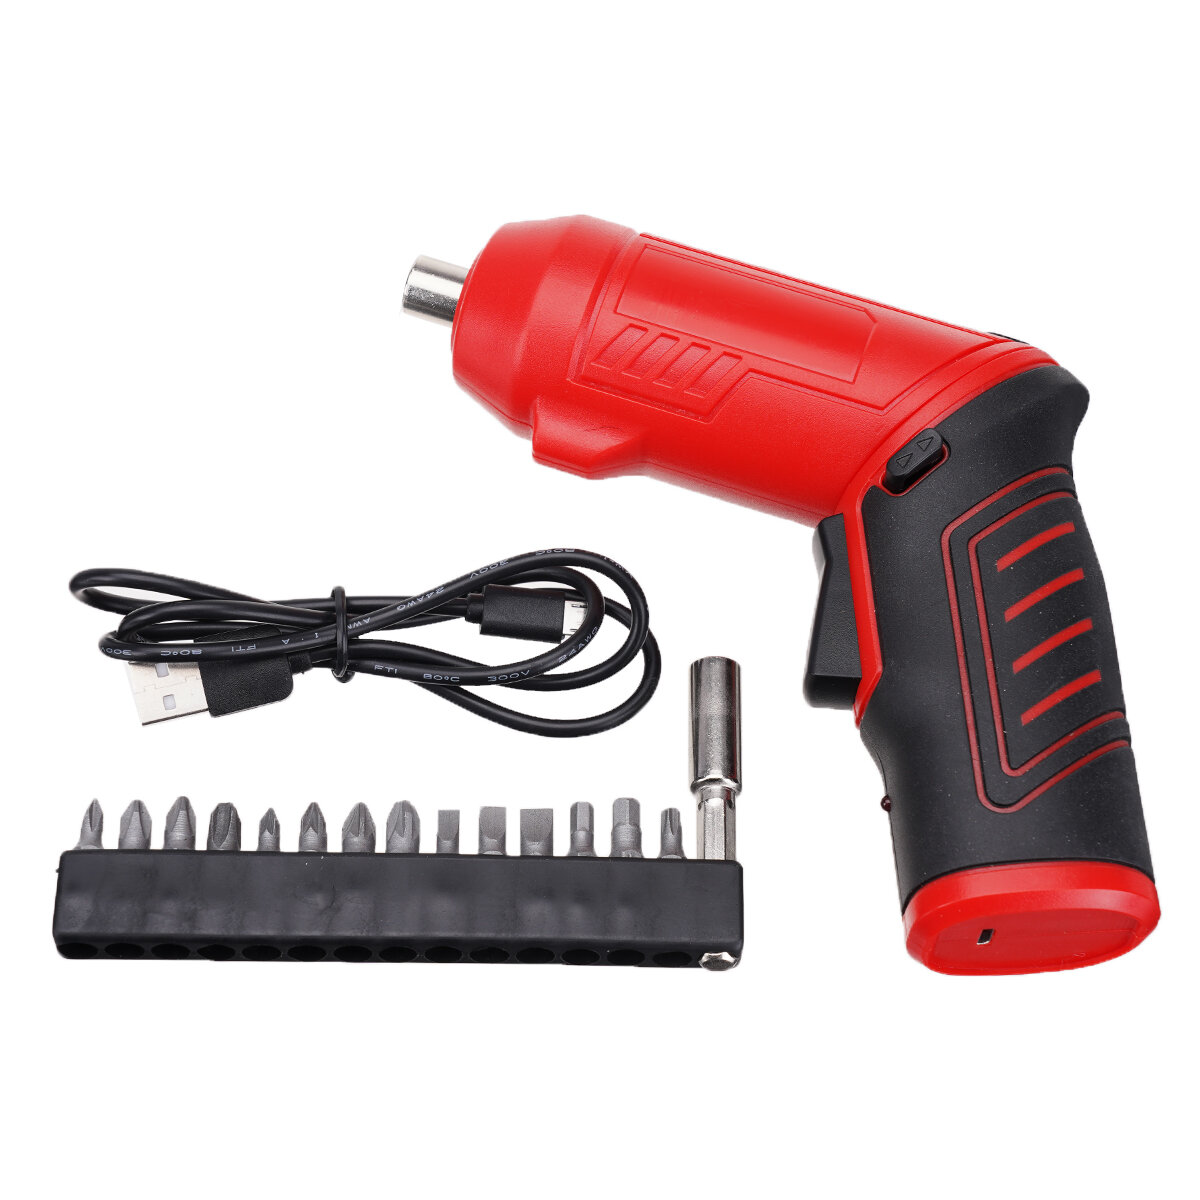 

DC 3.6V 3.5N.M 1500mah 250rpm Electric Screwdriver 90° Rotary Handle With 13 Batch Heads